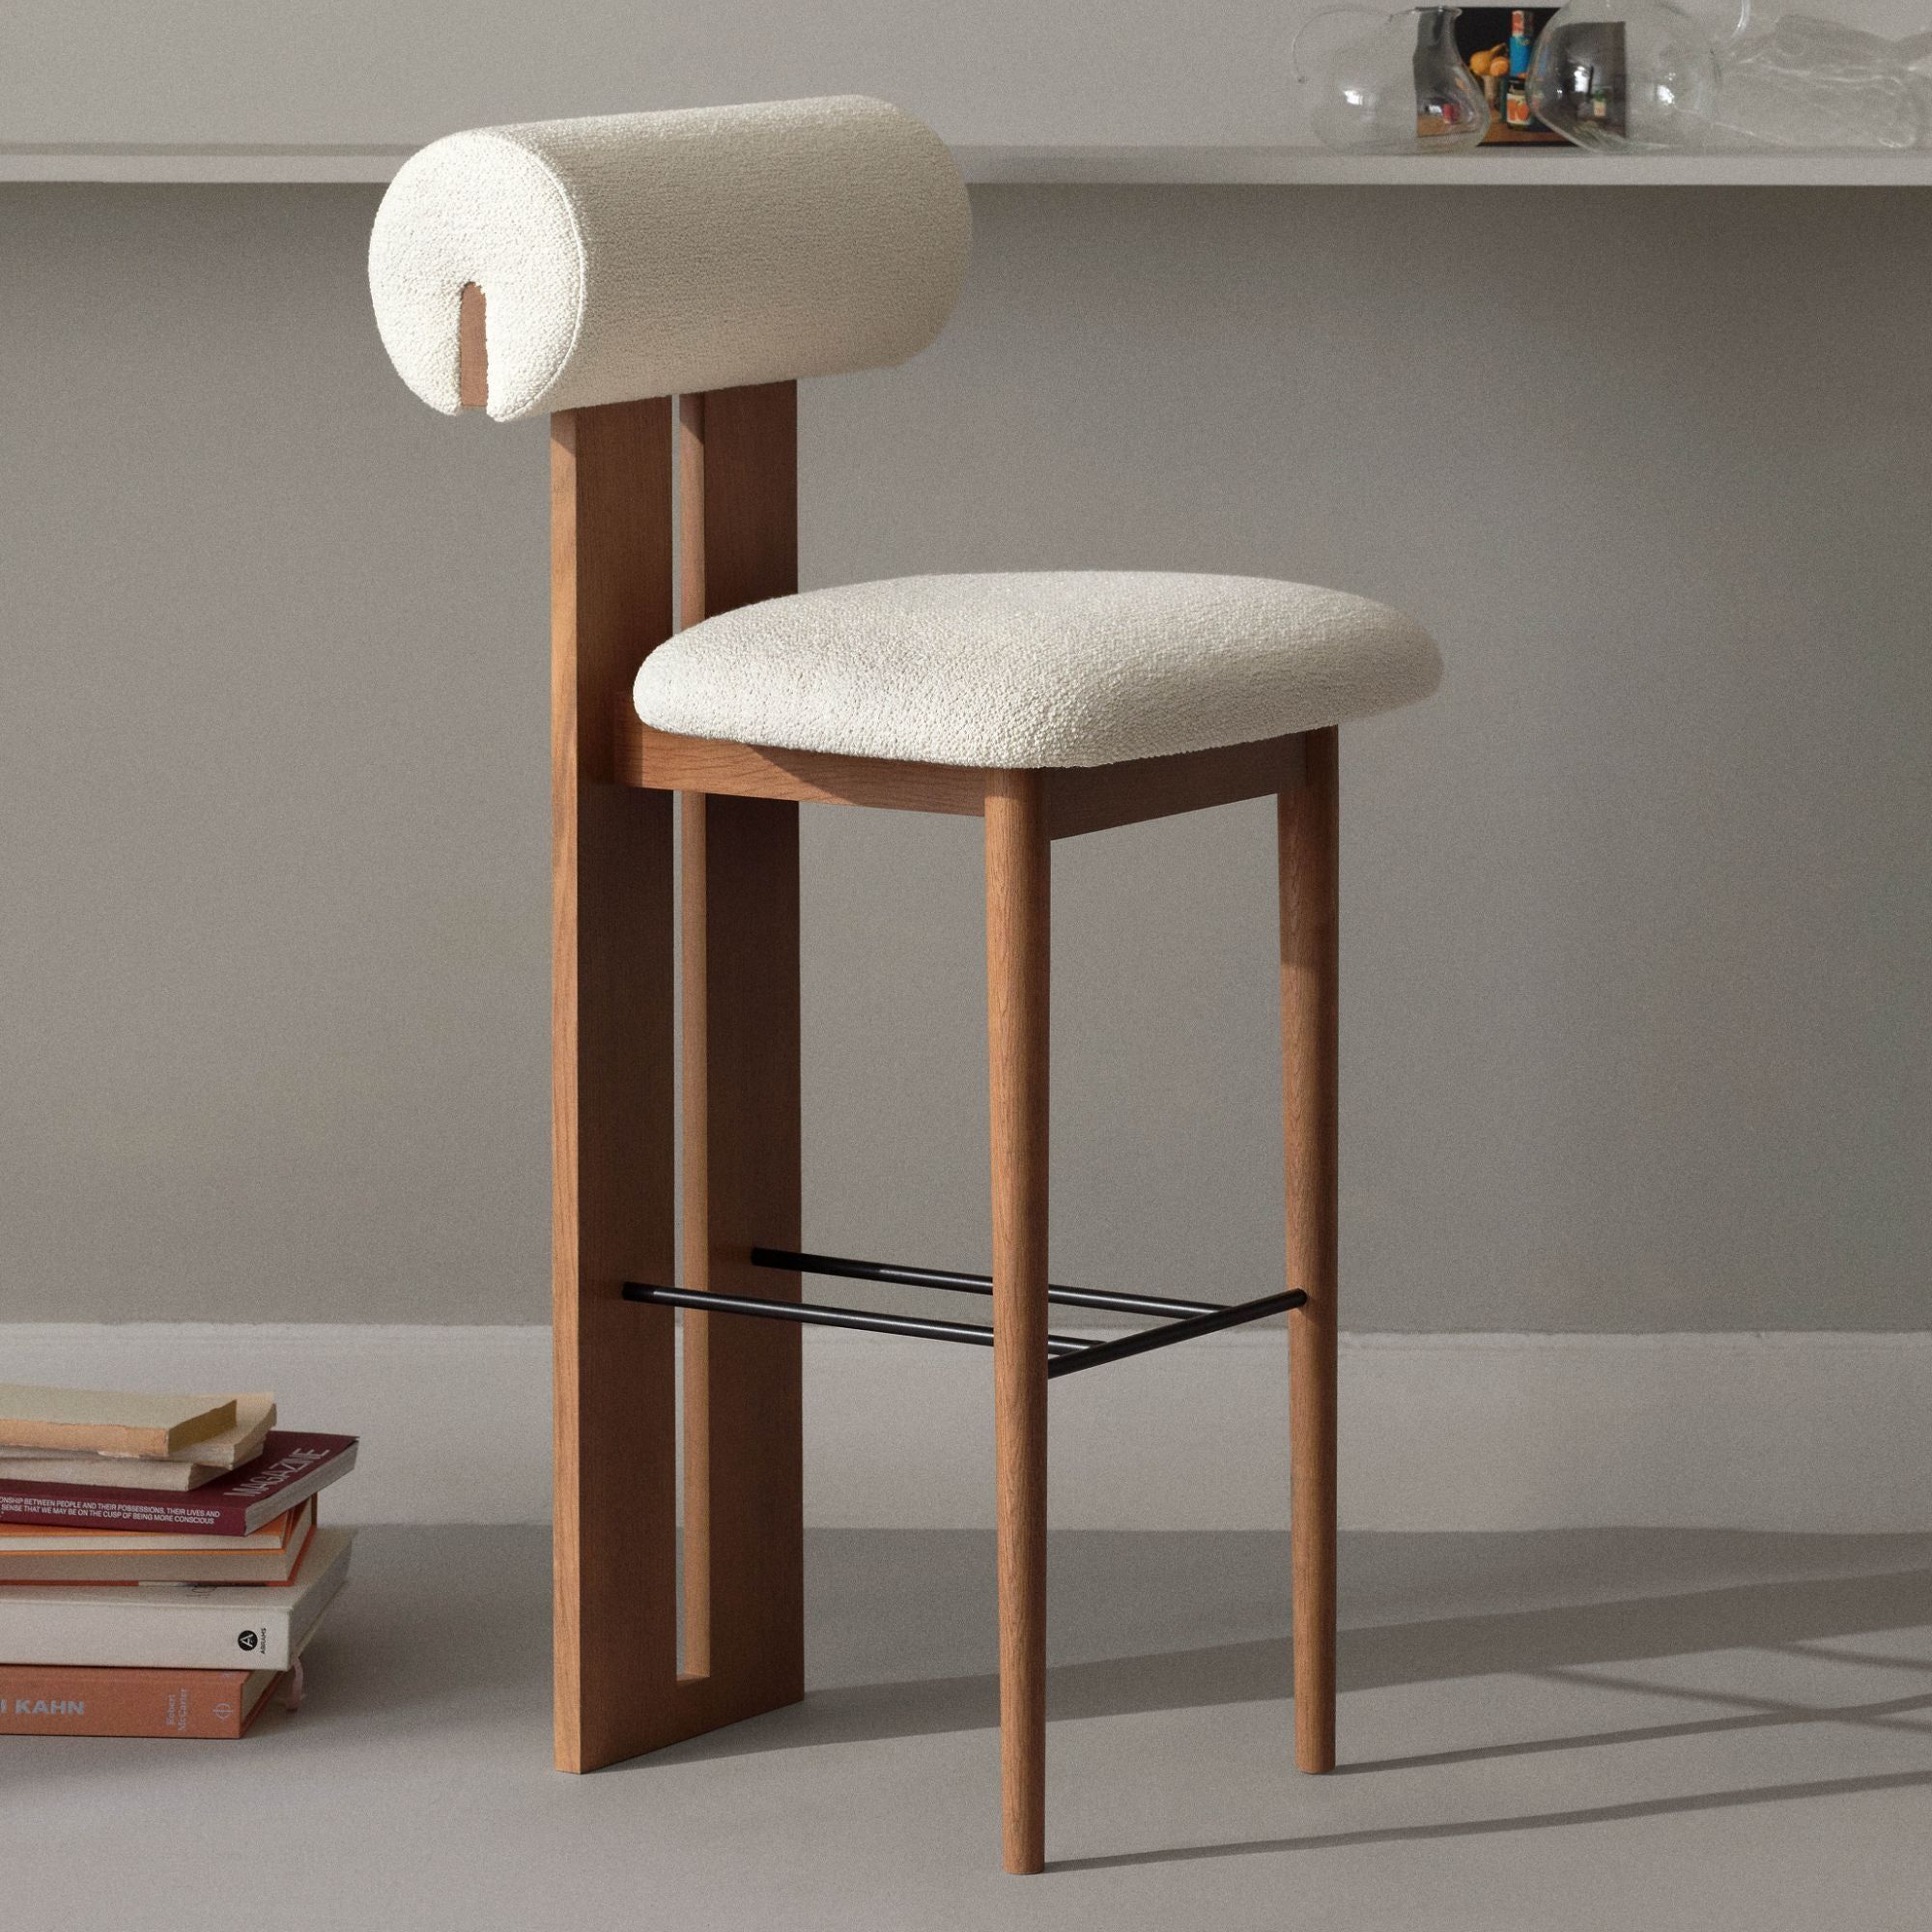 The Versatile and Stylish Seating Solution: Bar Stools